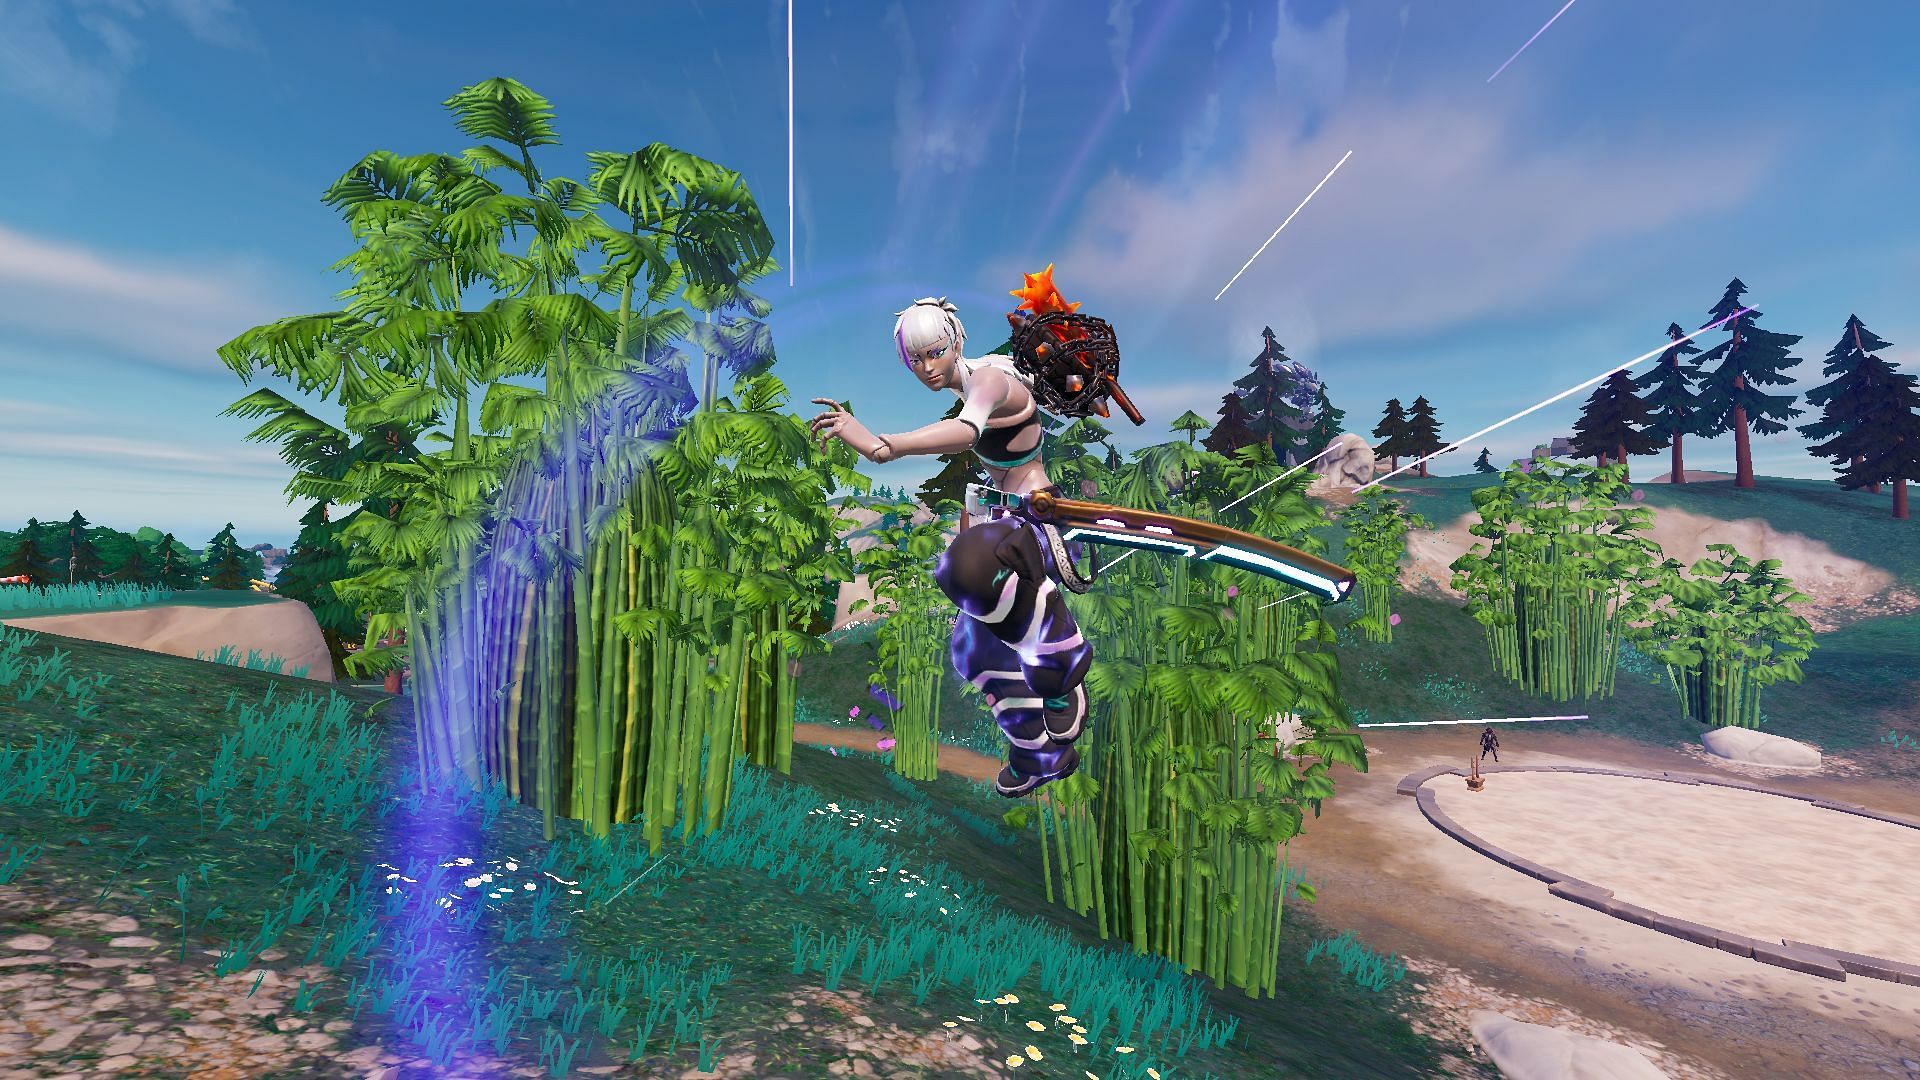 The Kinetic Blade will be added back to the game (Image via Epic Games)